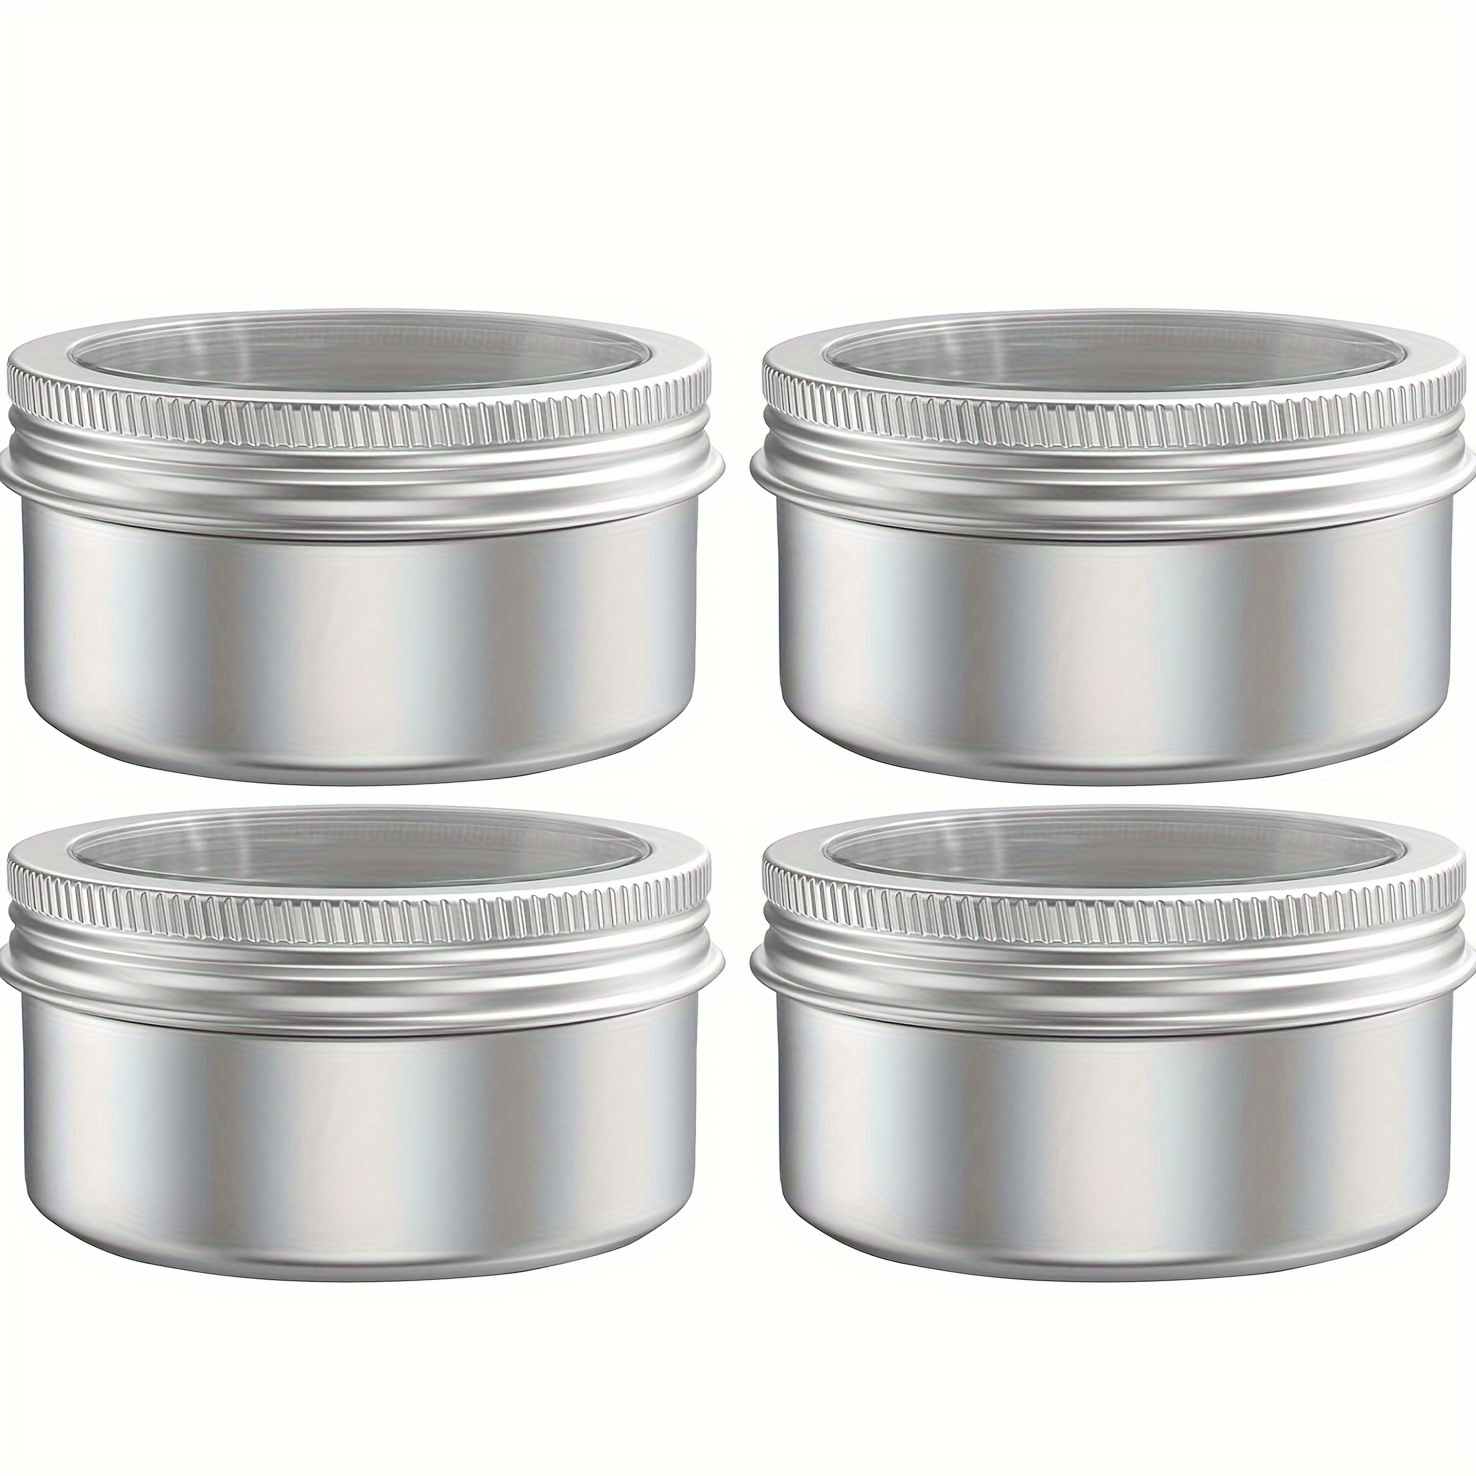 6pcs Metal Candle Jars, Aluminum Screw Top Round Steel Cans Aluminum Cans  With Screw Cap Screw Lid Containers For Candle Making, Crafts, Fragrance, Gi